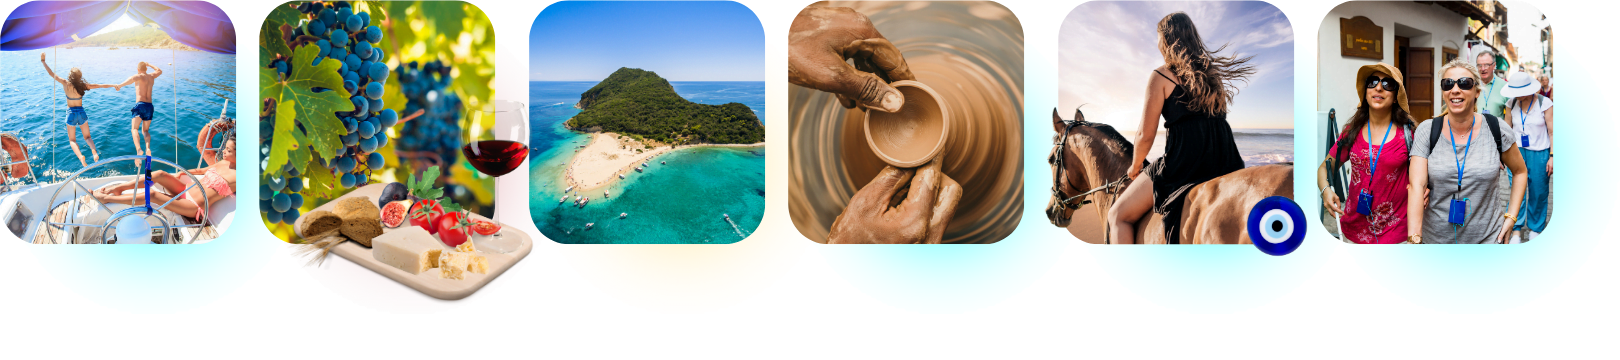 experience tiles featuring blue caves, friends on a cruise, shipwreck beach, a vineyard, clay making, horse riding and a tour guide in Zakynthos island